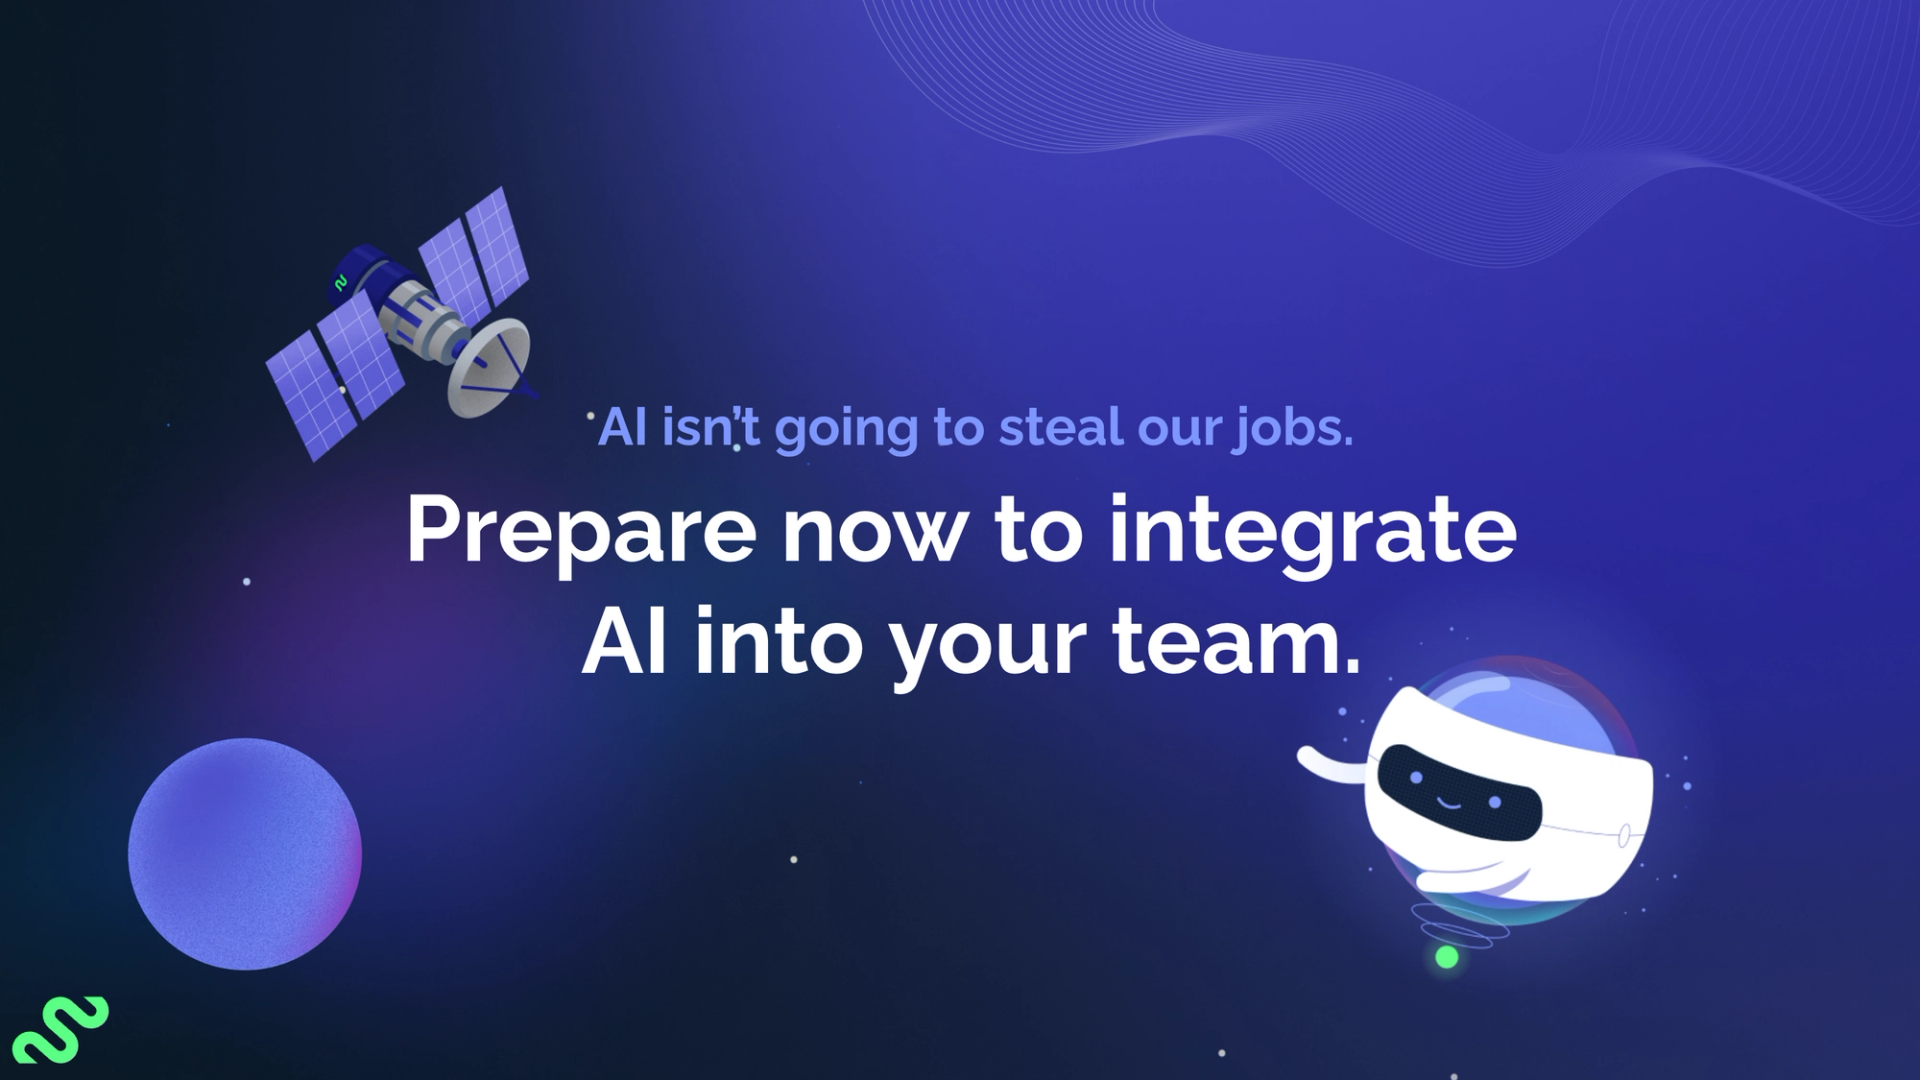 AI isn't going to steal our jobs. Prepare now to integrate AI into your team.